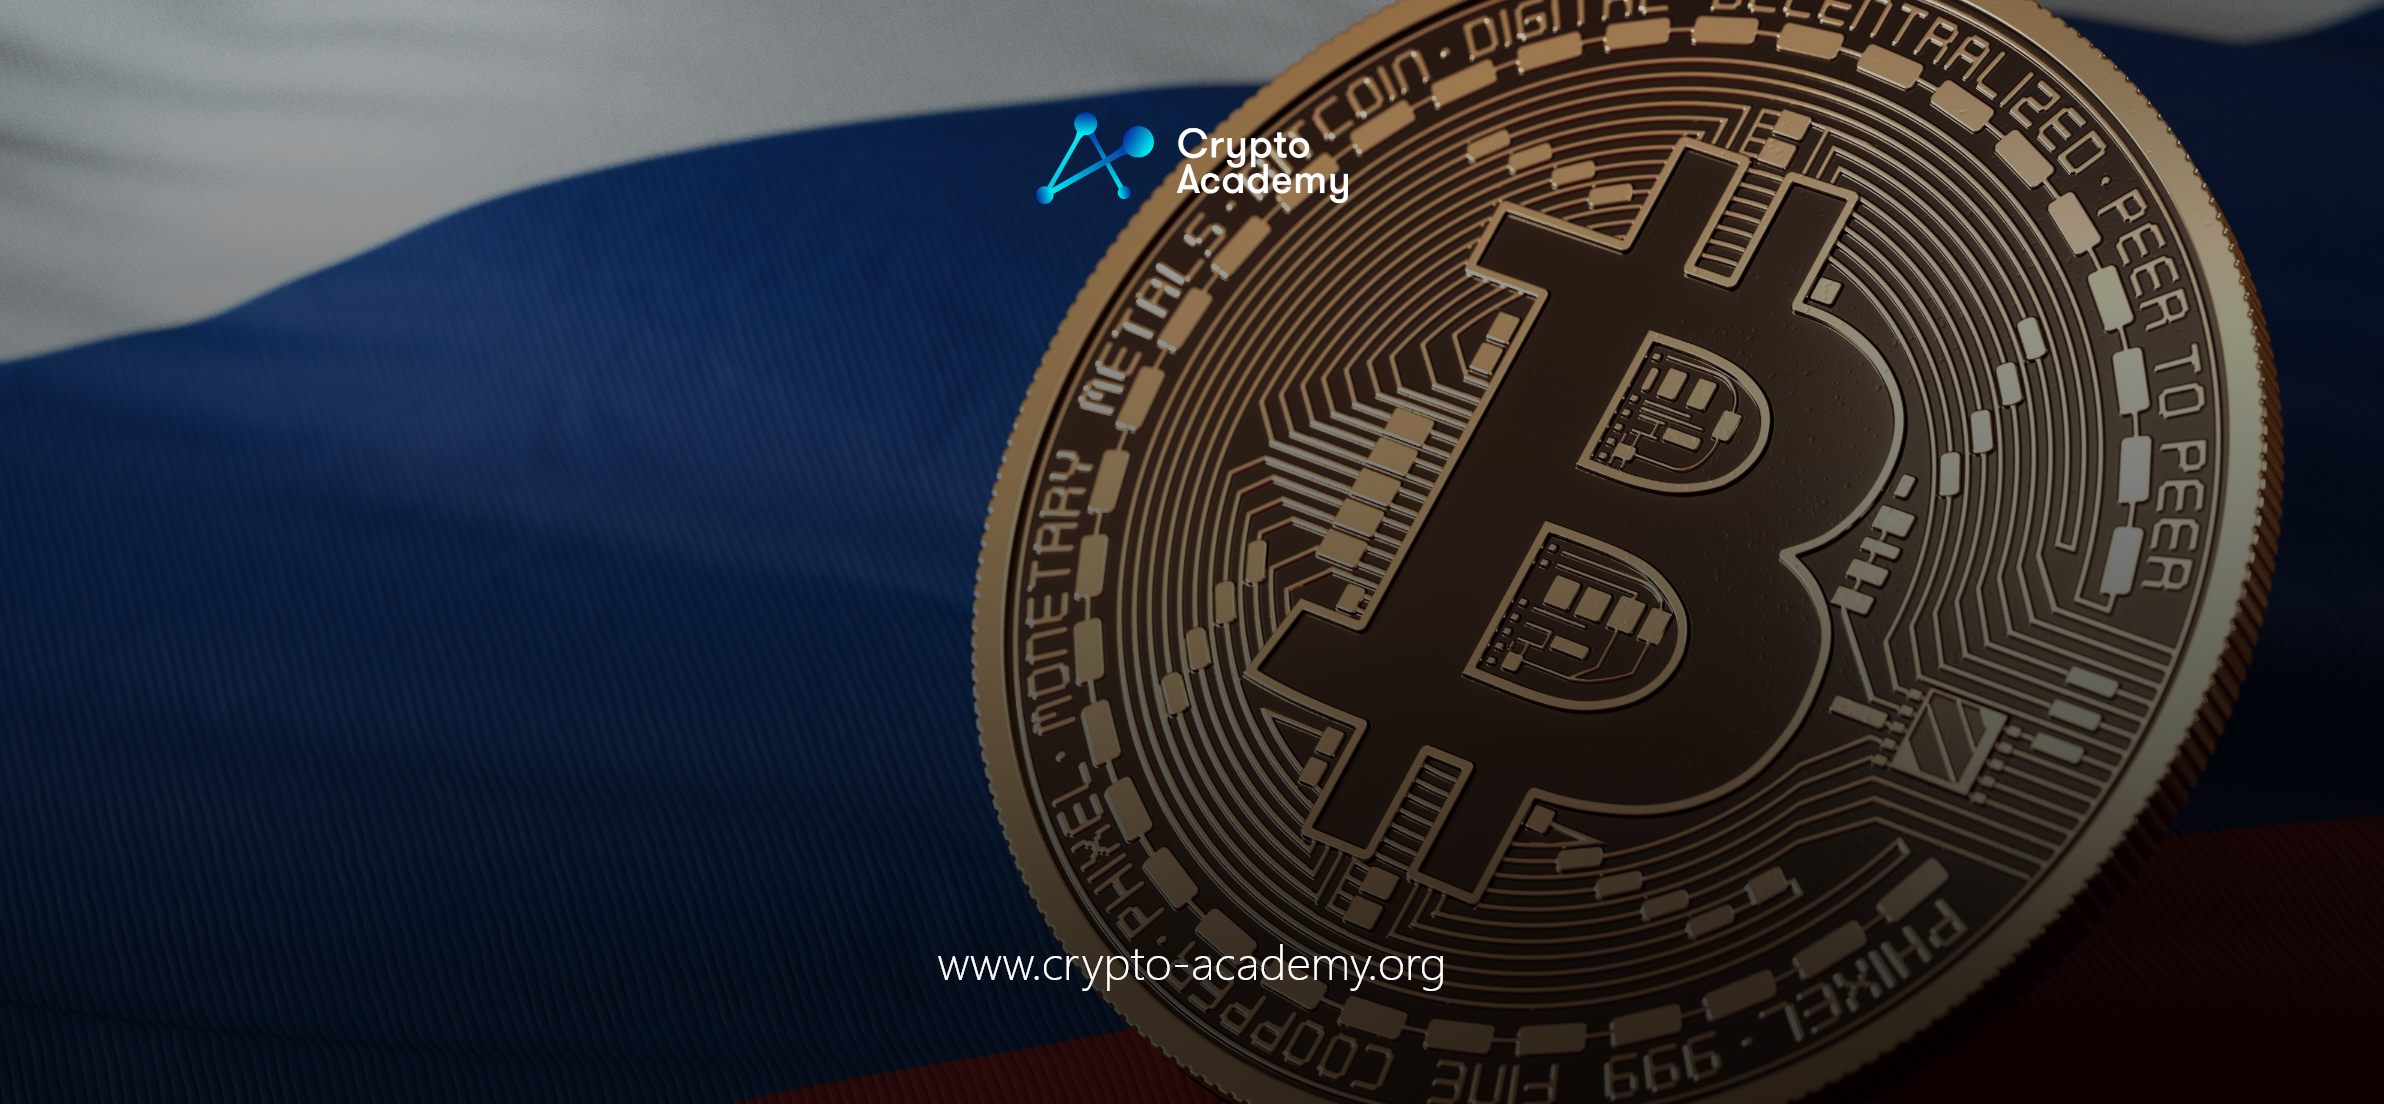 Russian Lawmaker: No Total Crypto Ban Plans